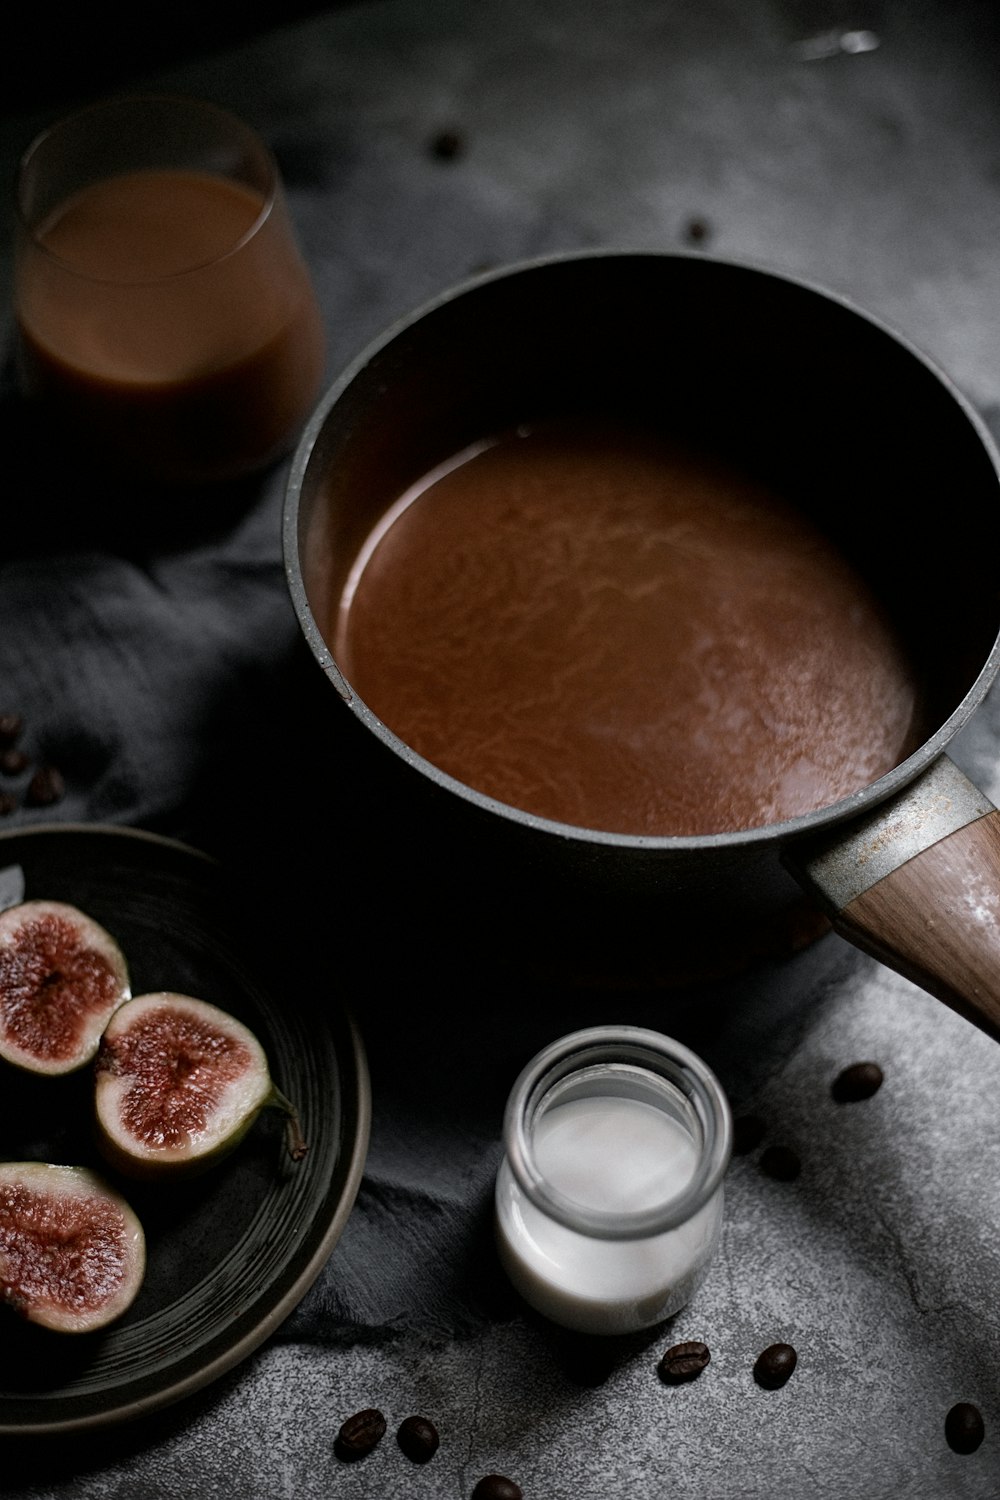 a pan of chocolate pudding with figs on a plate